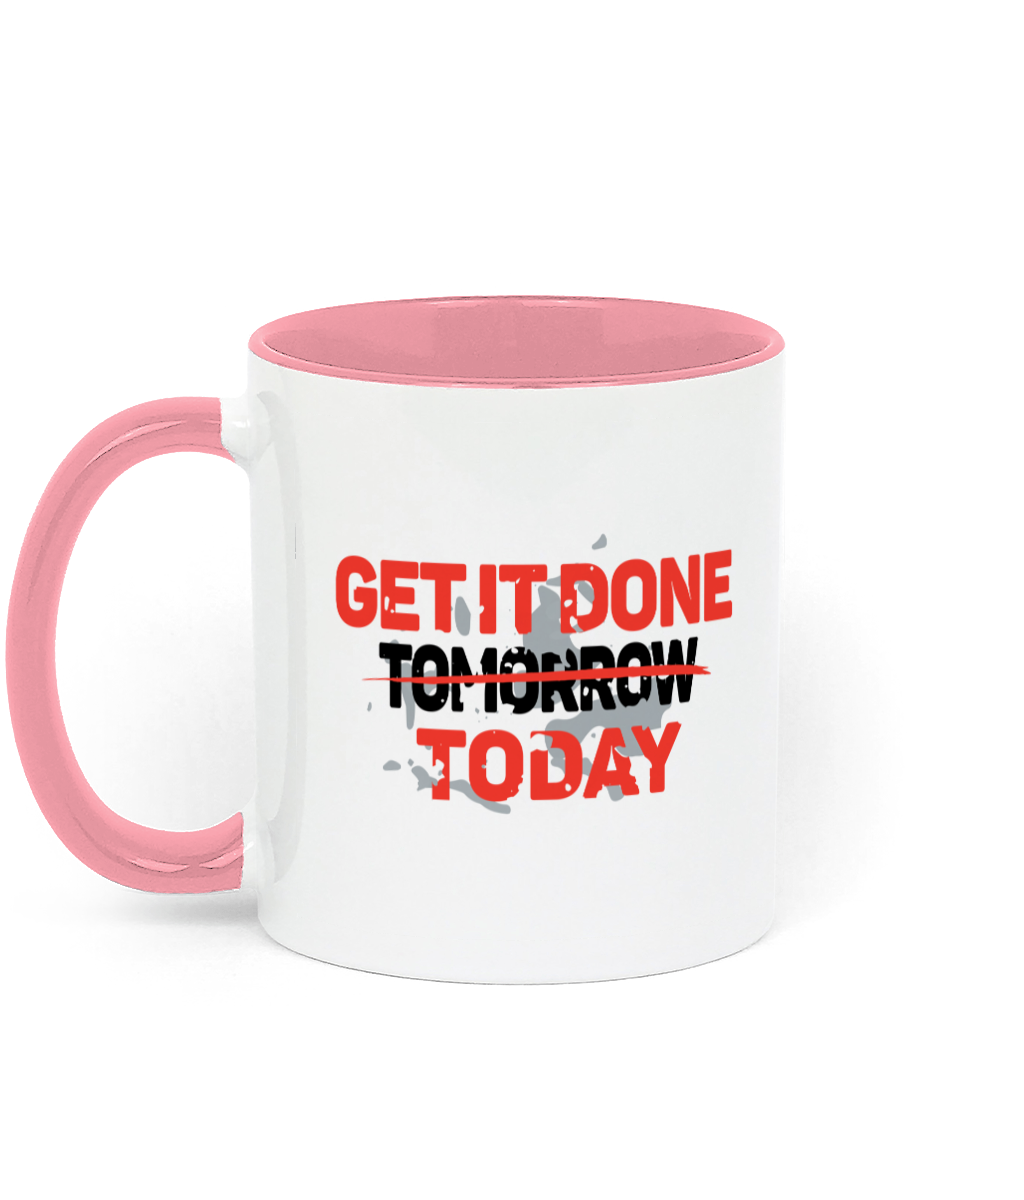 Get it done today 11 oz mug. Daily Affirmations, Motivation, Inspiration, Productivity, Achieving Goals. Perfect Gift. Two-toned.  Pink